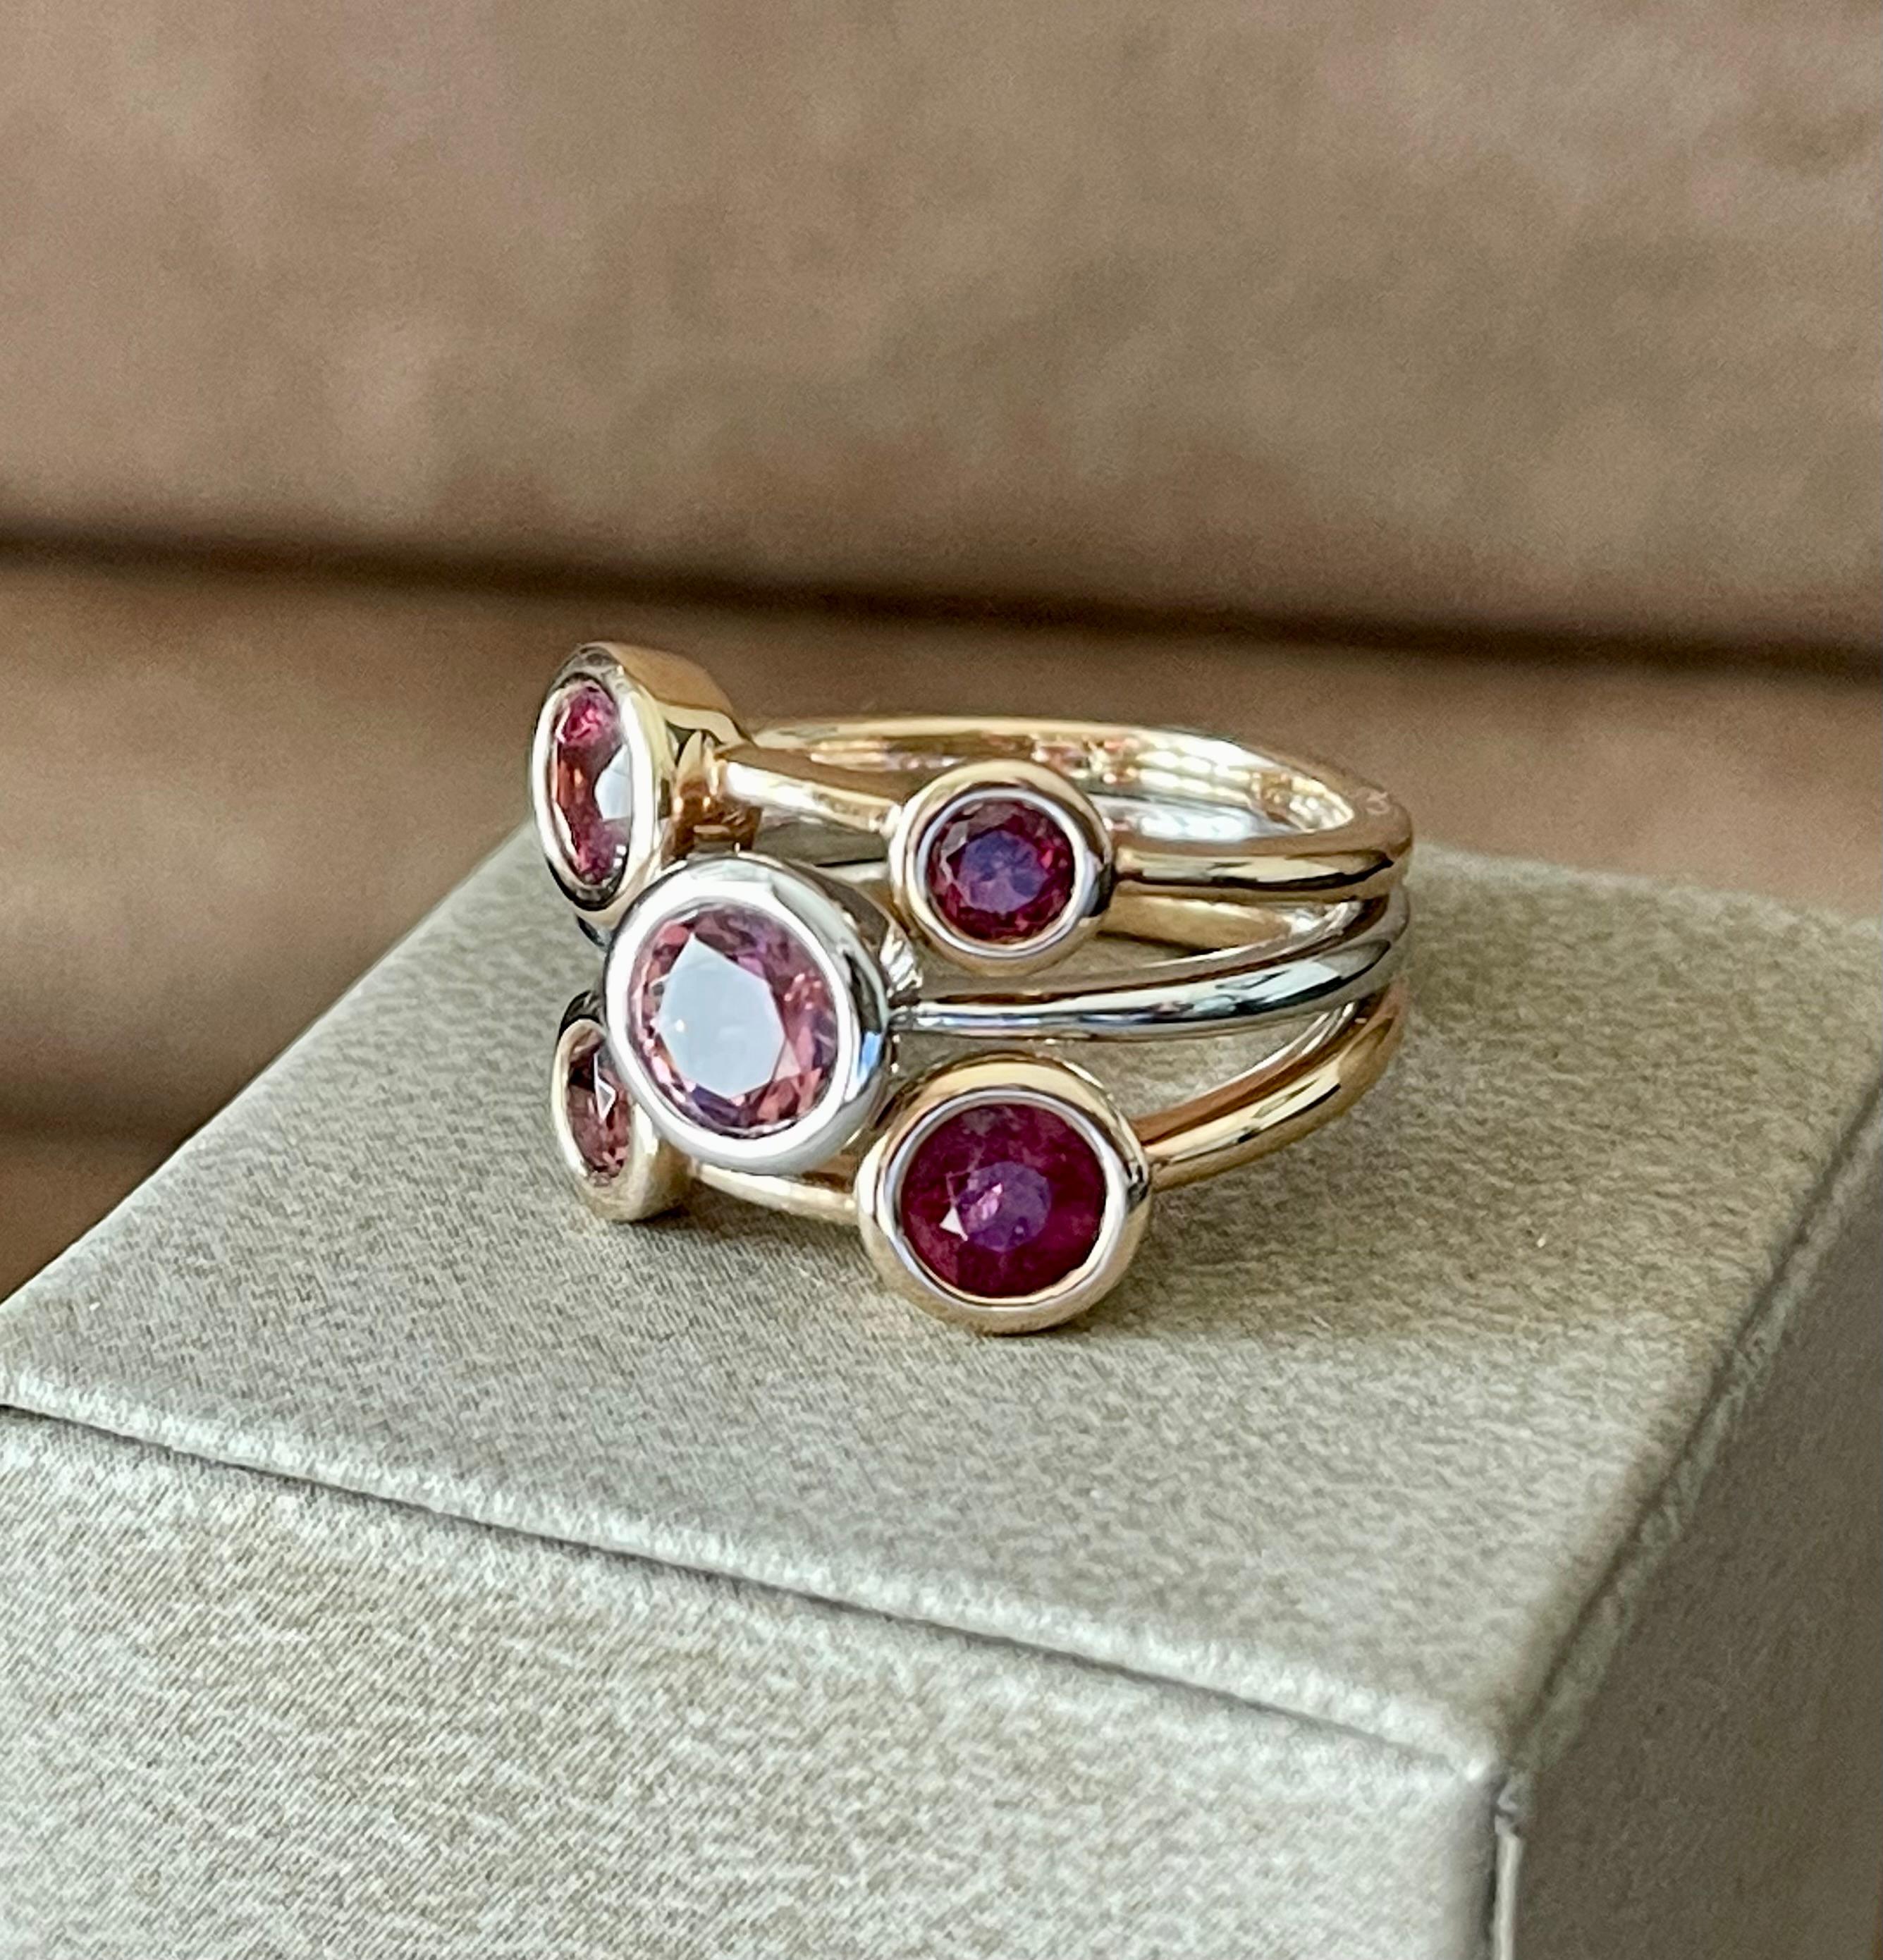 Contemporary Modern White and Pink Gold Ring Pink Tourmaline